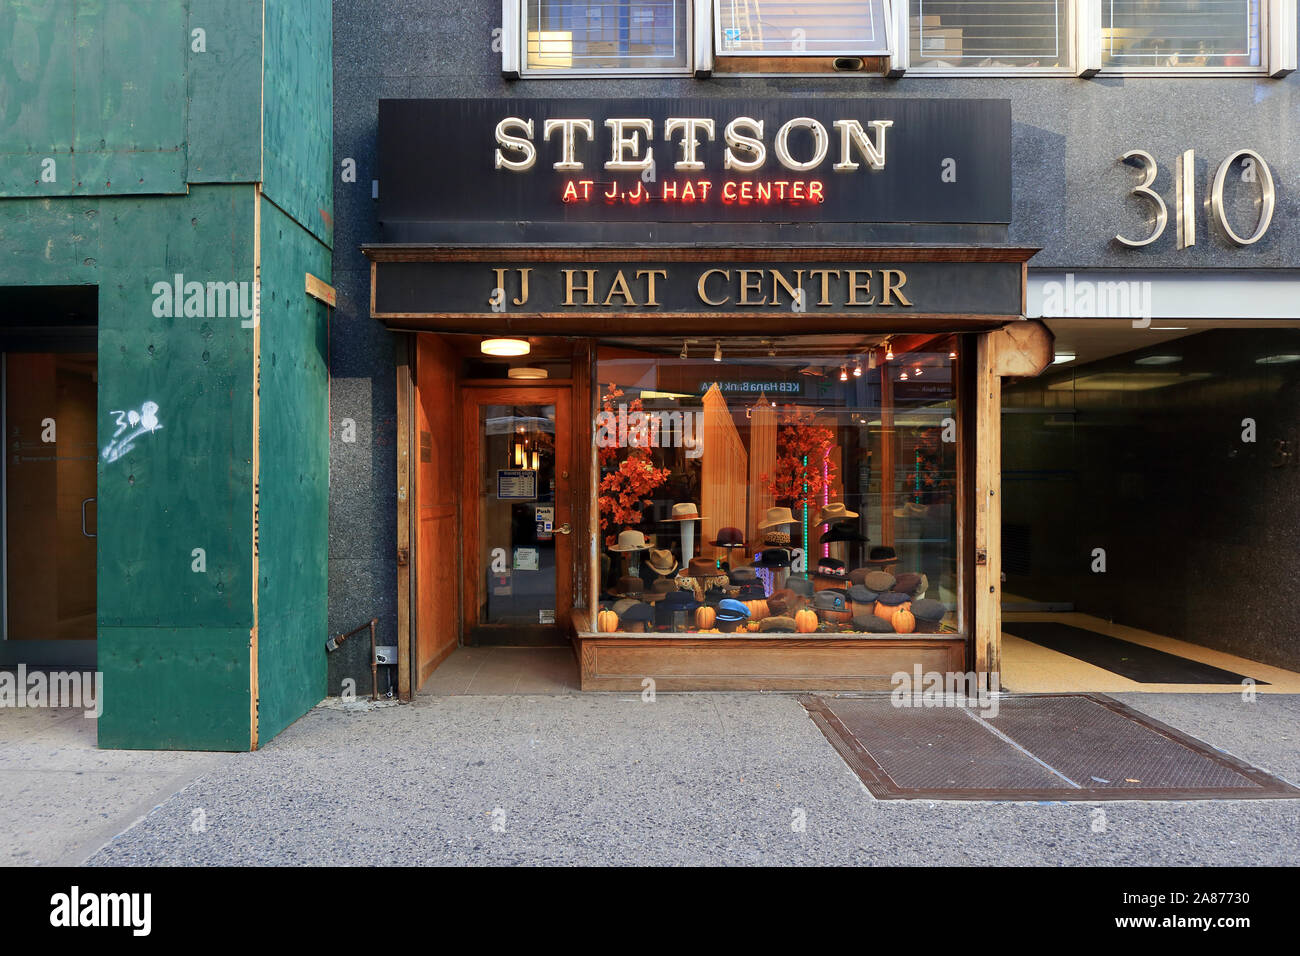 J.J. Hat Center, 310 5th Avenue, New York, NY.  exterior storefront of a hat store in midtown Manhattan. Stock Photo